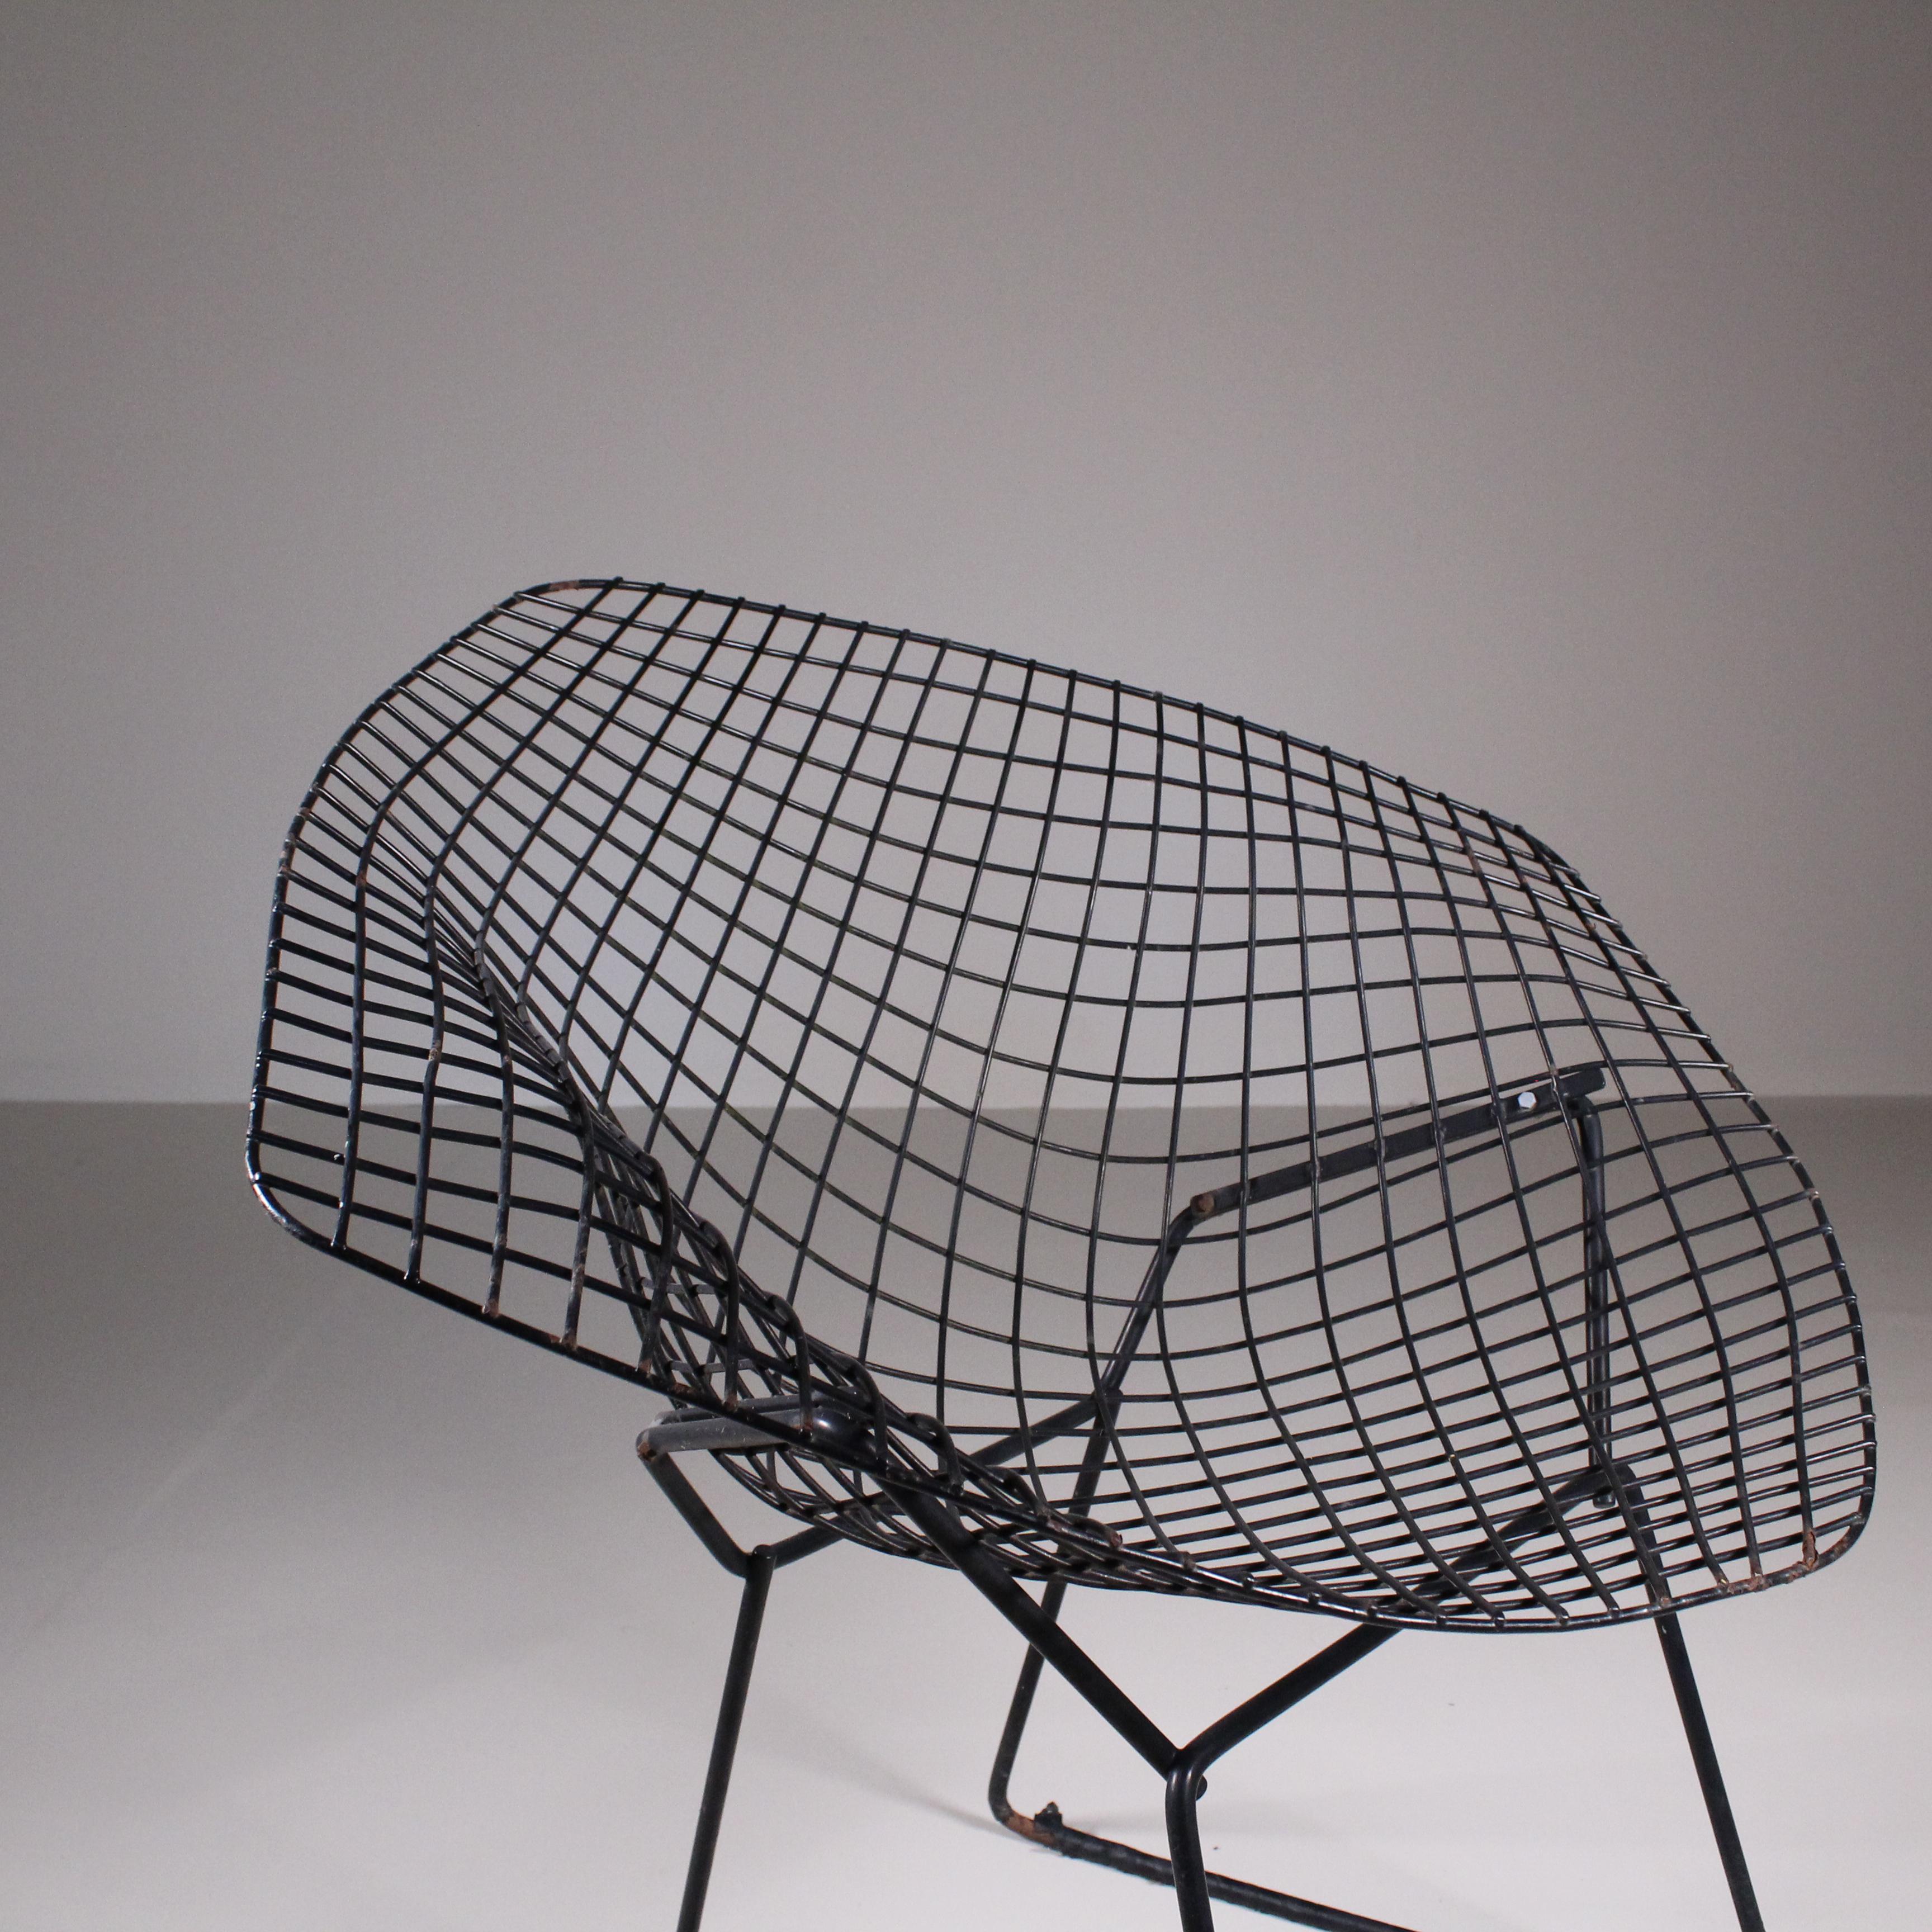 The Diamond Chair is an astounding study in space, form and function by one of the master sculptors of the last century. Like Saarinen and Mies, Bertoia found sublime grace in an industrial material, elevating it beyond its normal utility into a